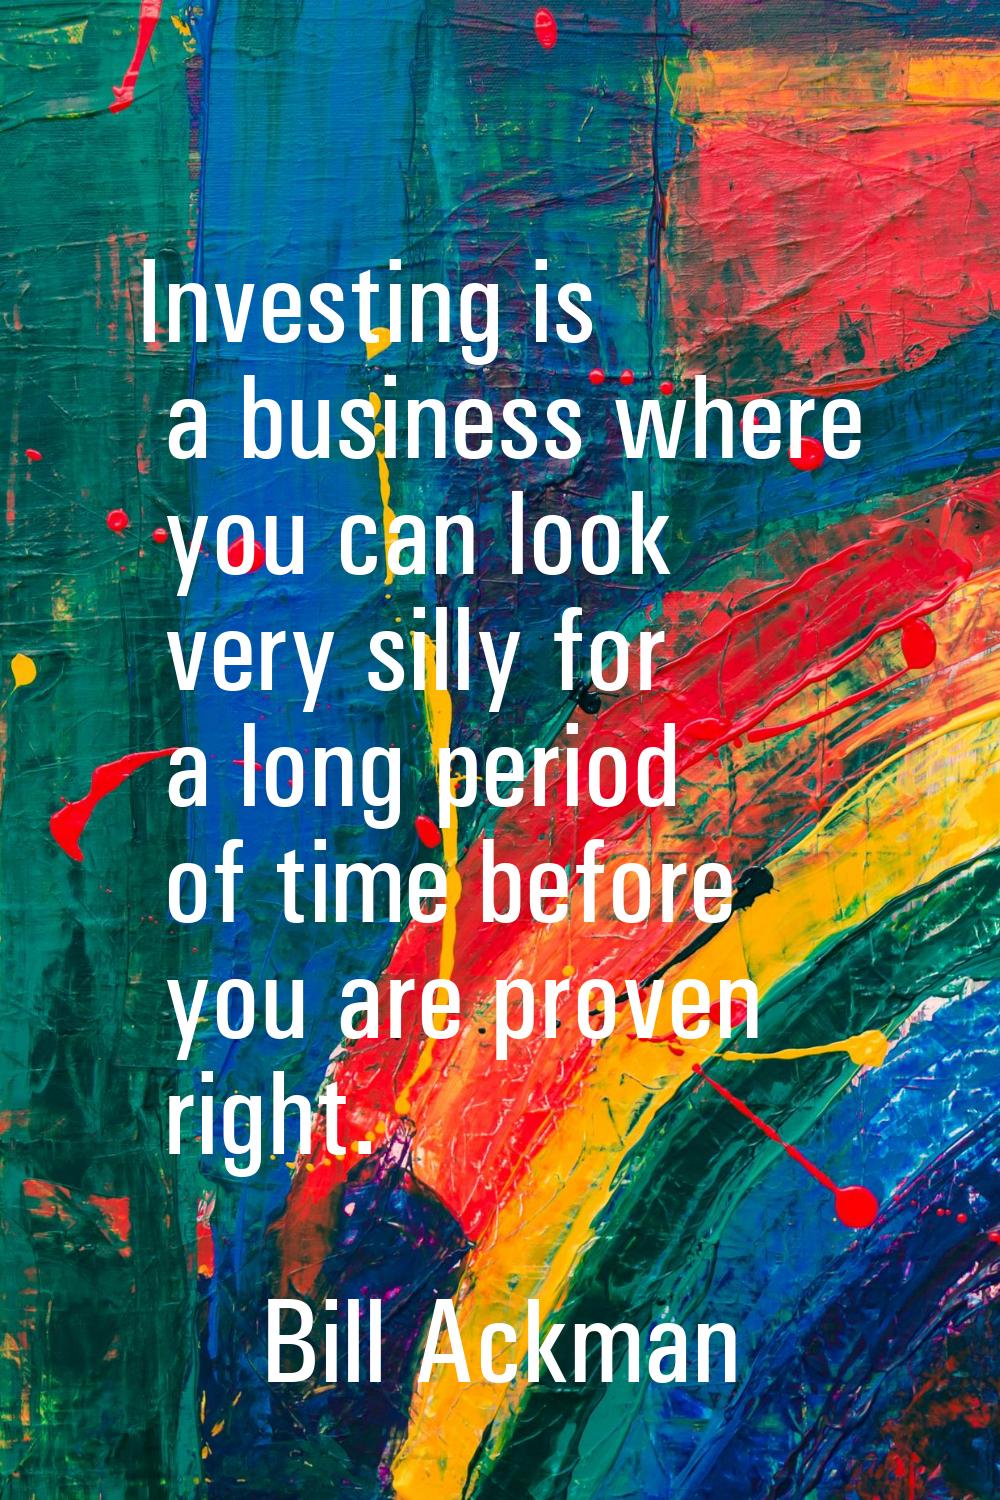 Investing is a business where you can look very silly for a long period of time before you are prov